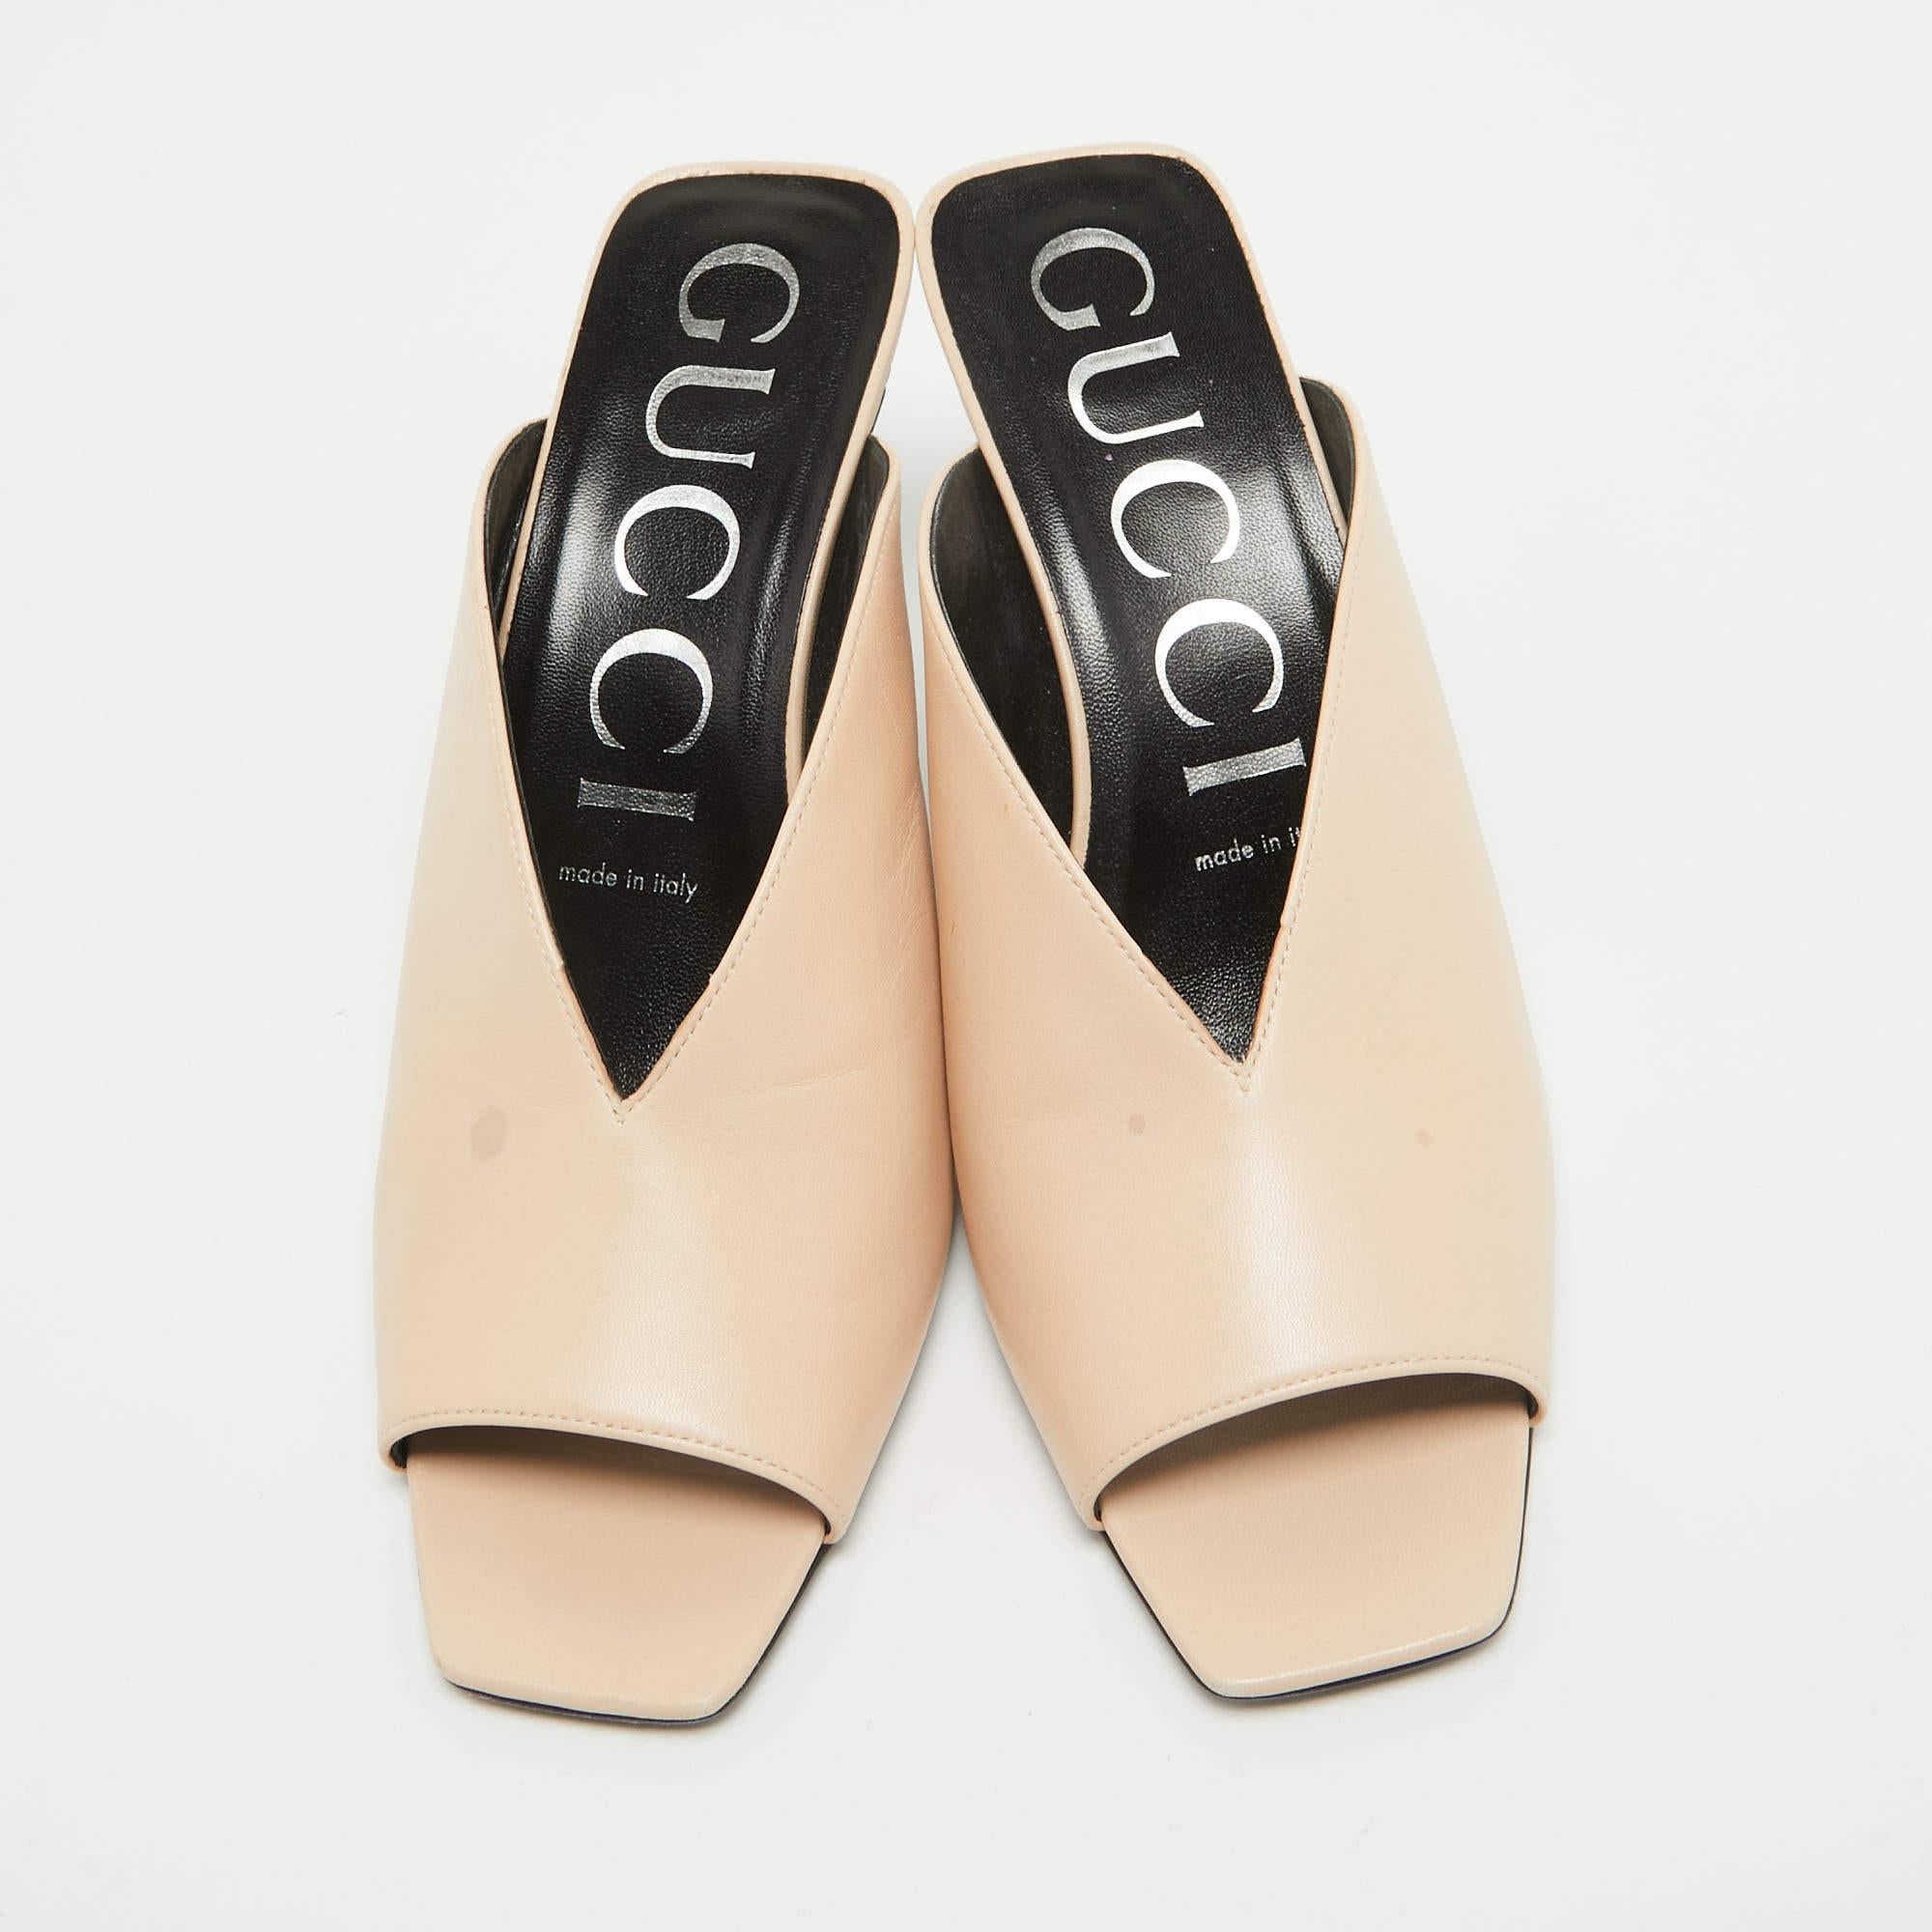 Complement your well-put-together outfit with these authentic Gucci heels. Timeless and classy, they have an amazing construction for enduring quality and comfortable fit.

